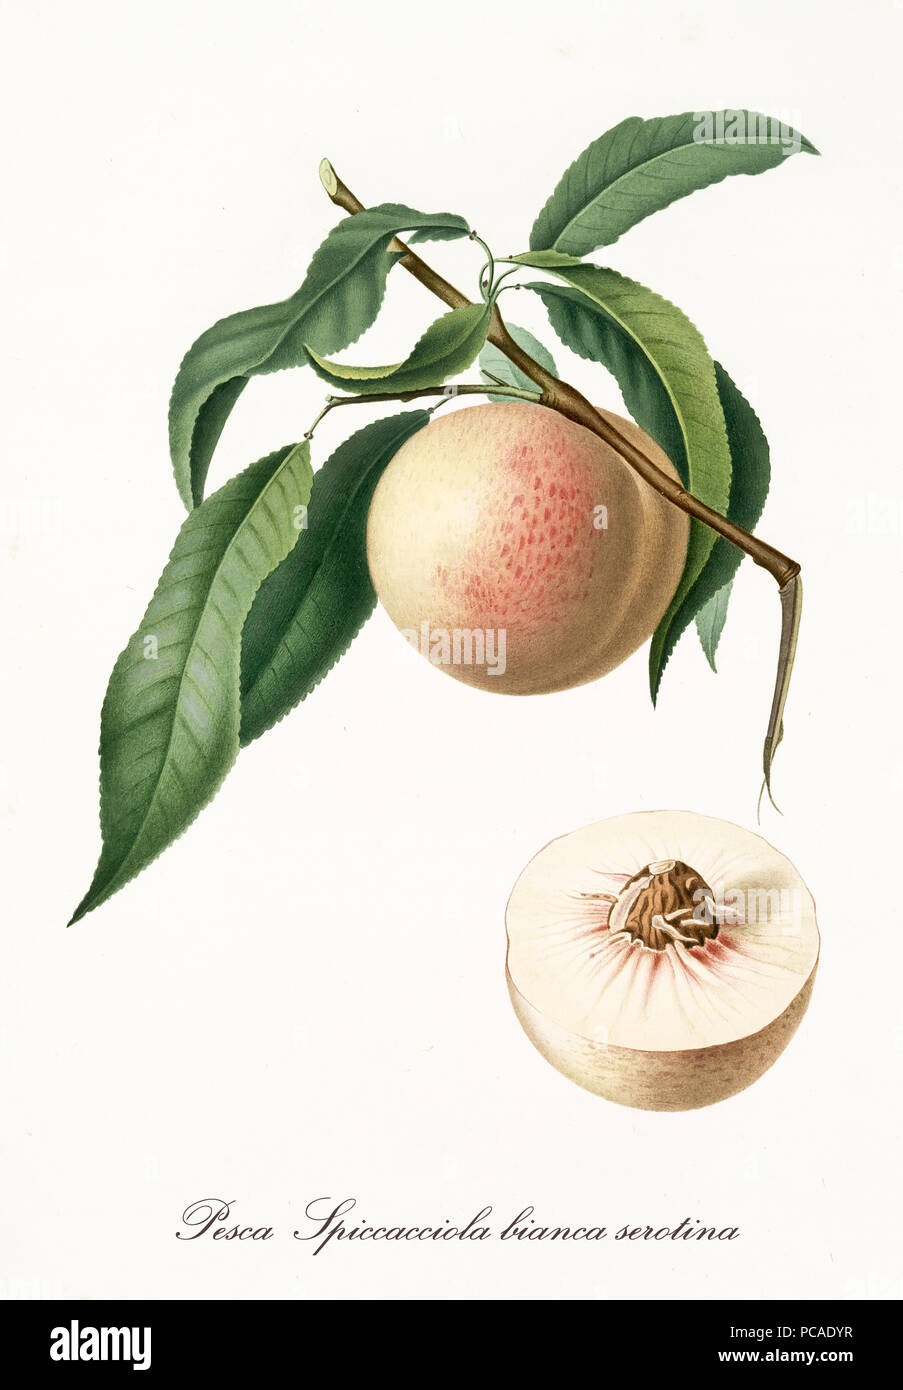 Single peach hanging from its branch with leaves and section of the fruit. Elements are isolated over white background. Old detailed botanical illustration by Giorgio Gallesio published in 1817, 1839 Stock Photo